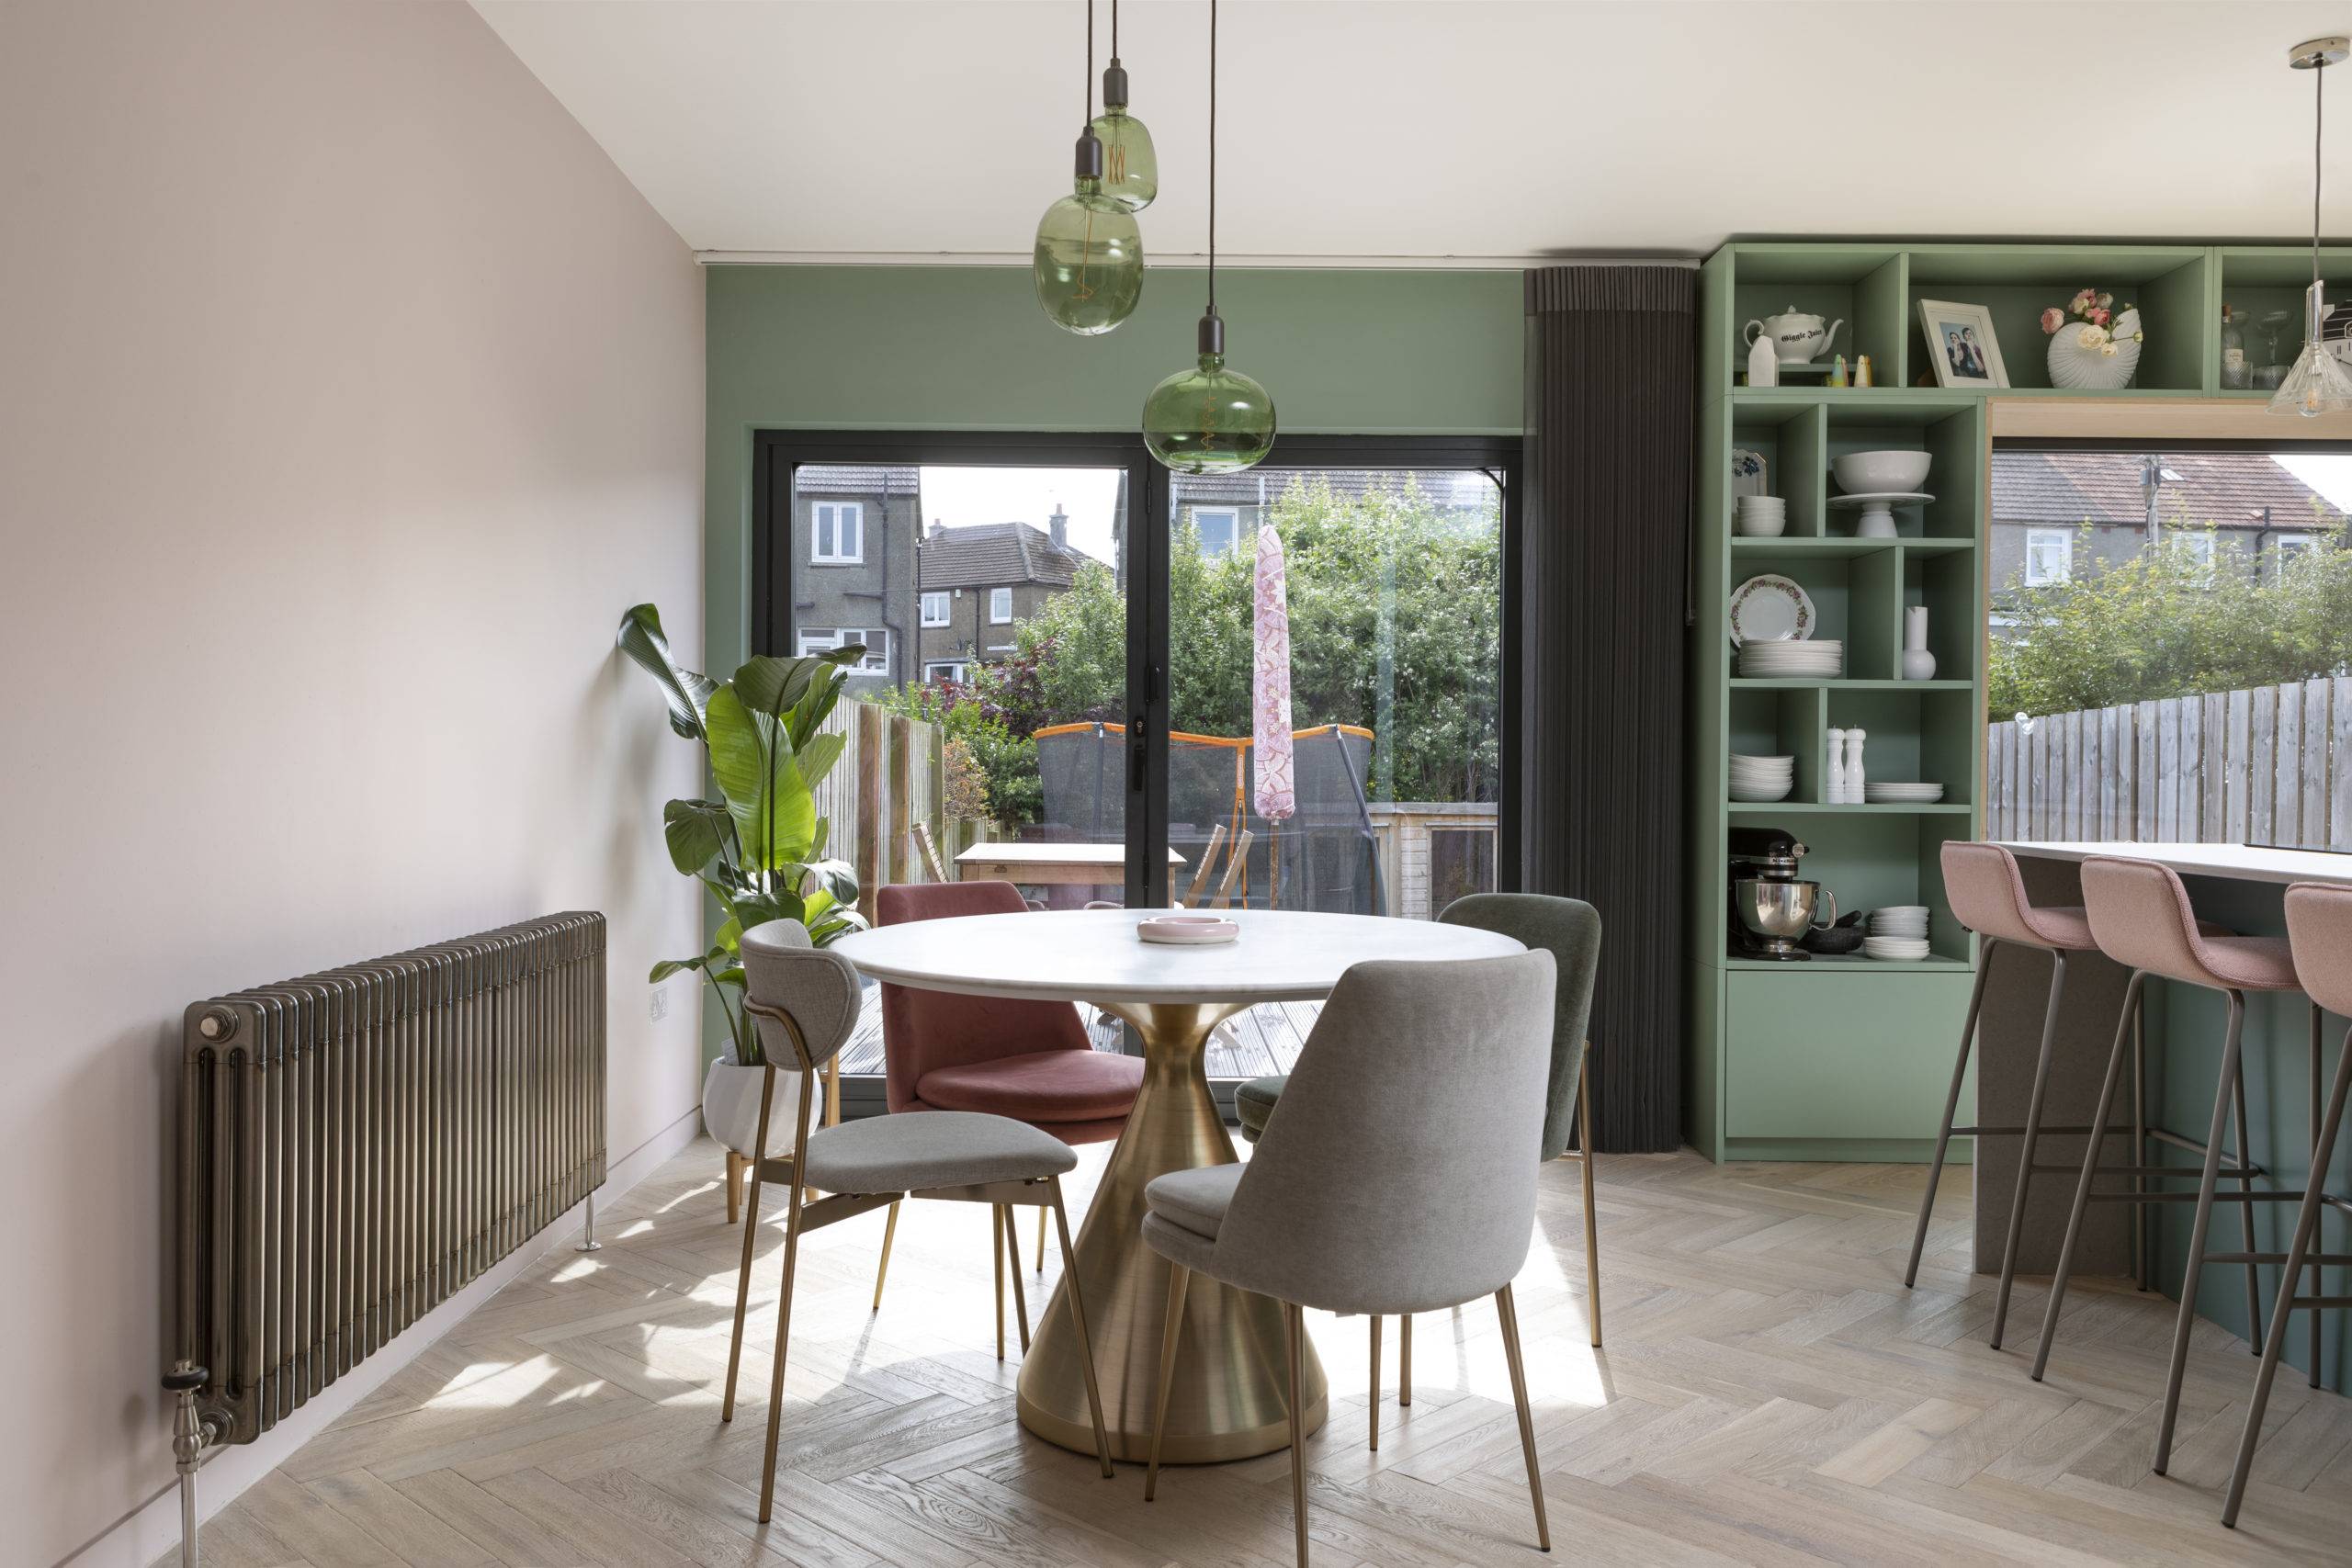 oak herringbone floors in kitchen with small circular dinning table and gold accented chairs, large sliding doors to exterior, green bespoke floor to ceiling shelving